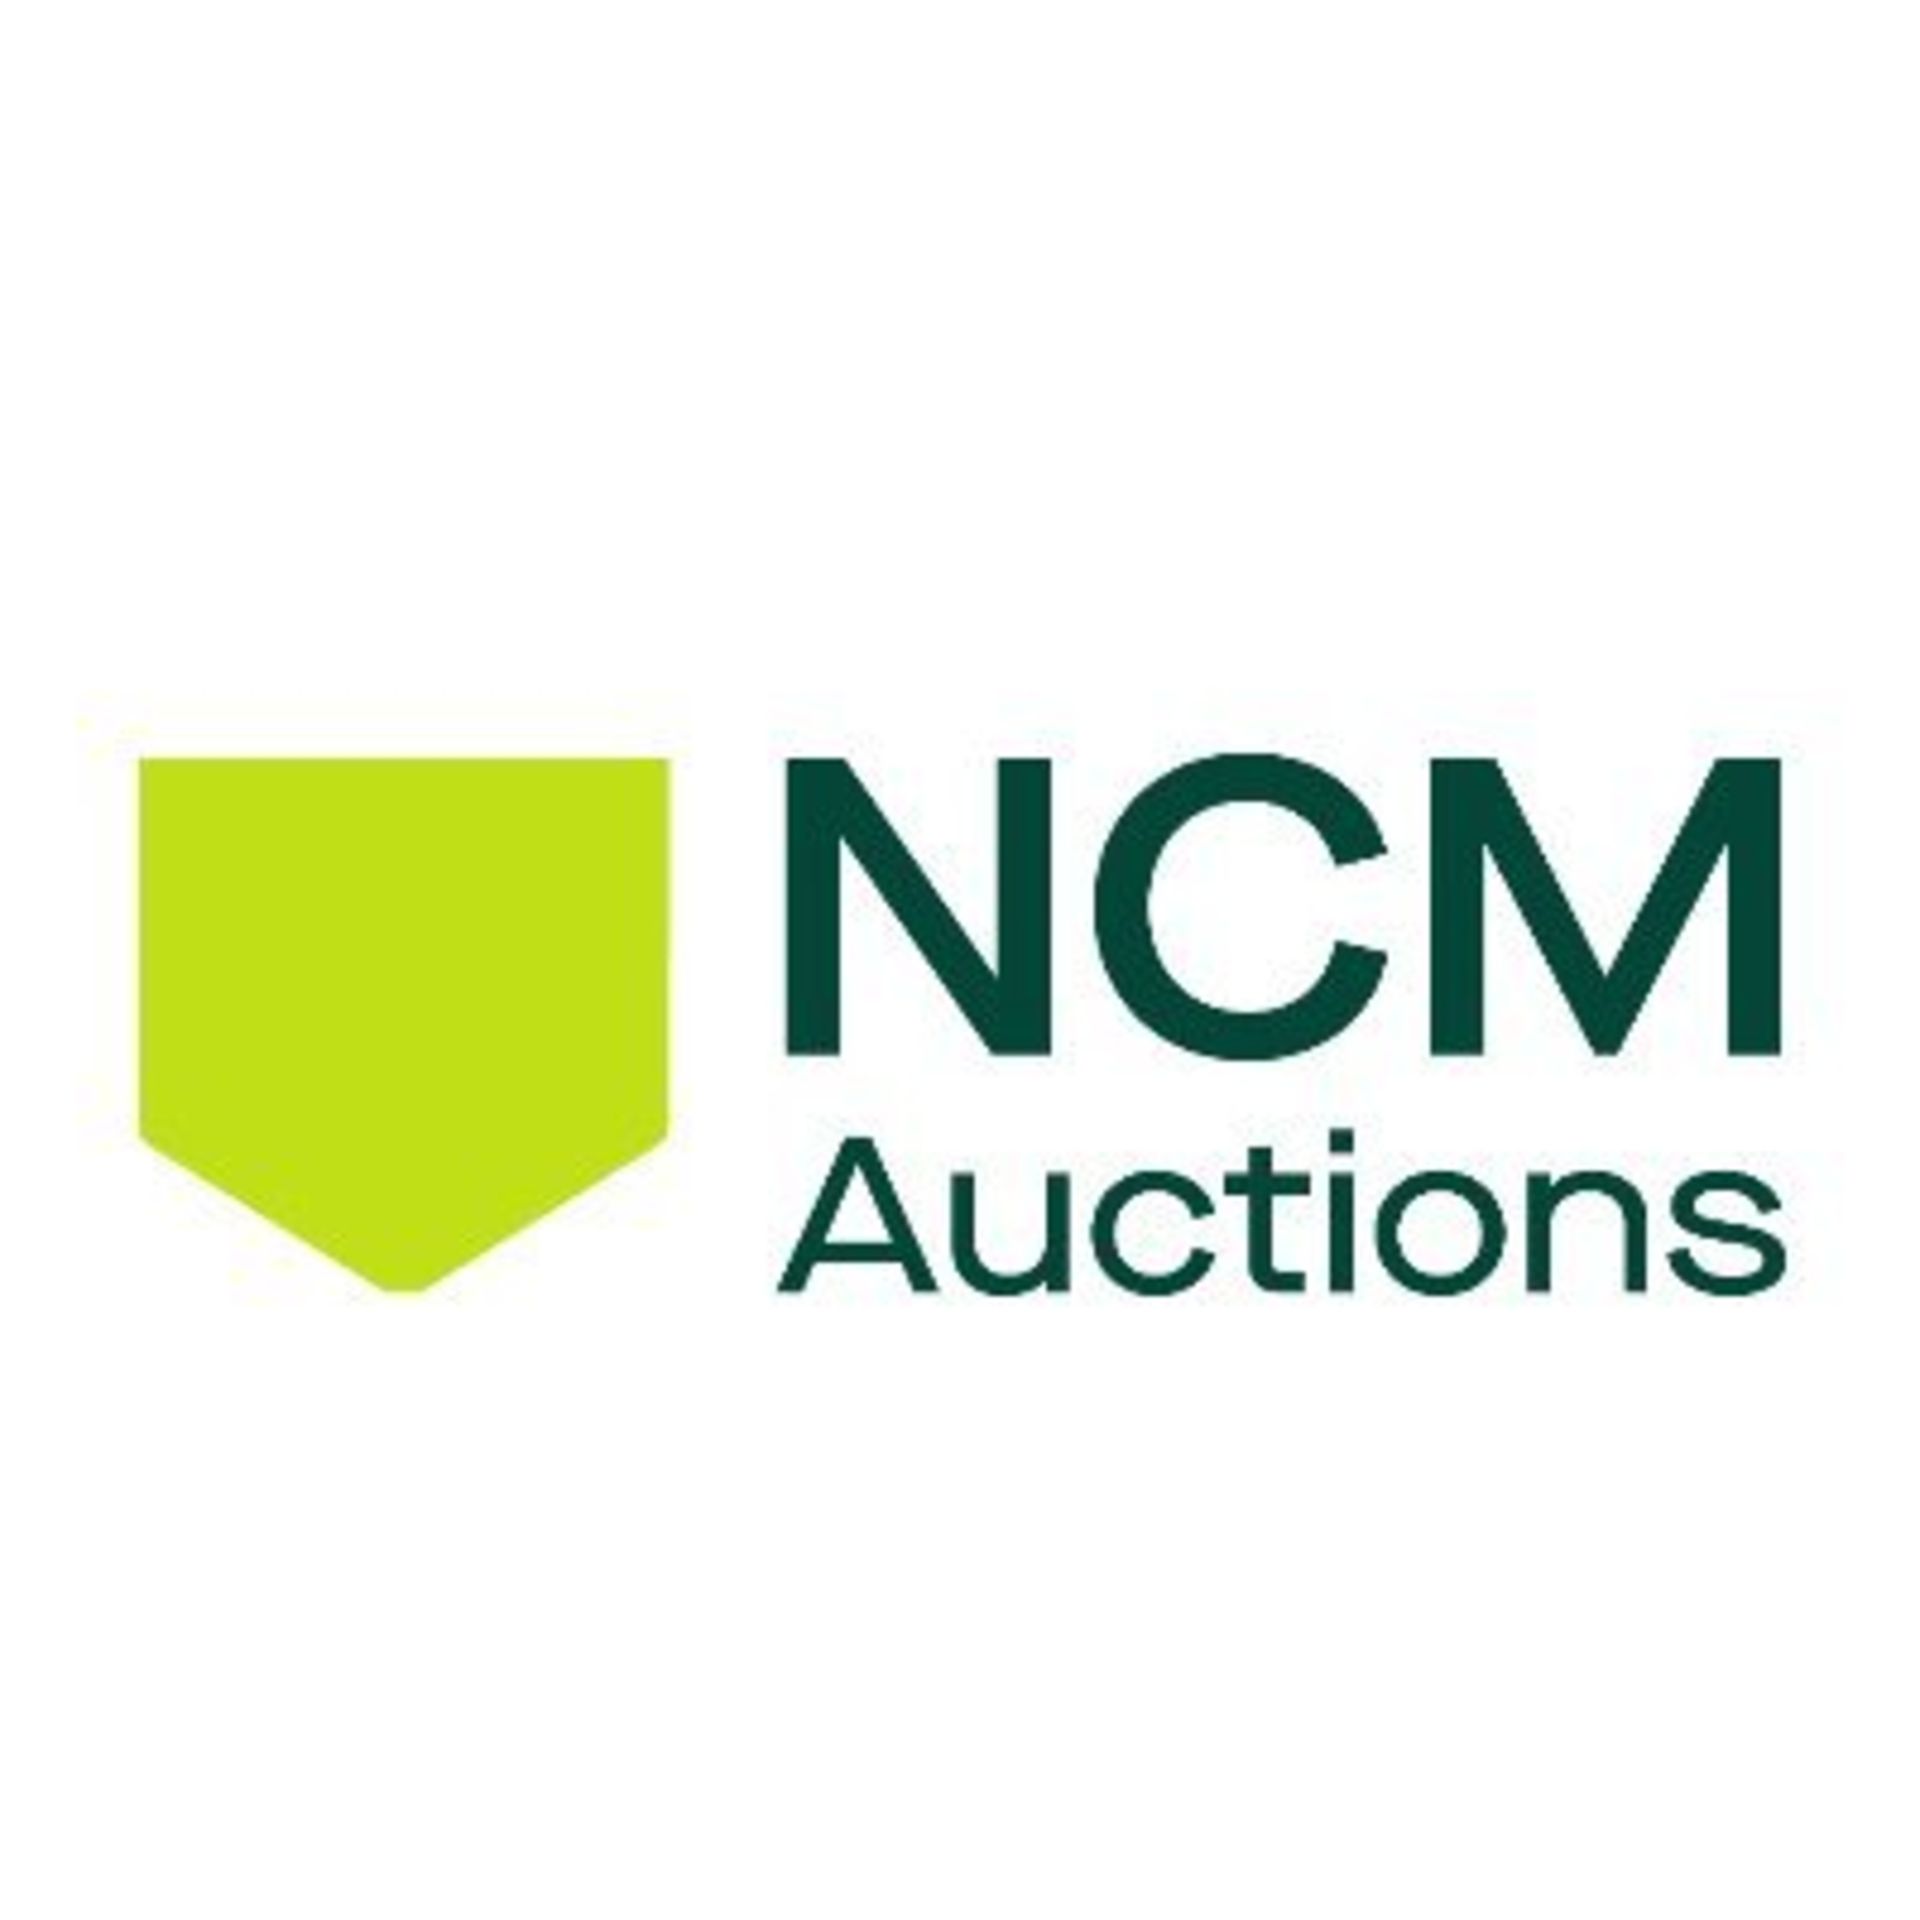 Important Information about this auction